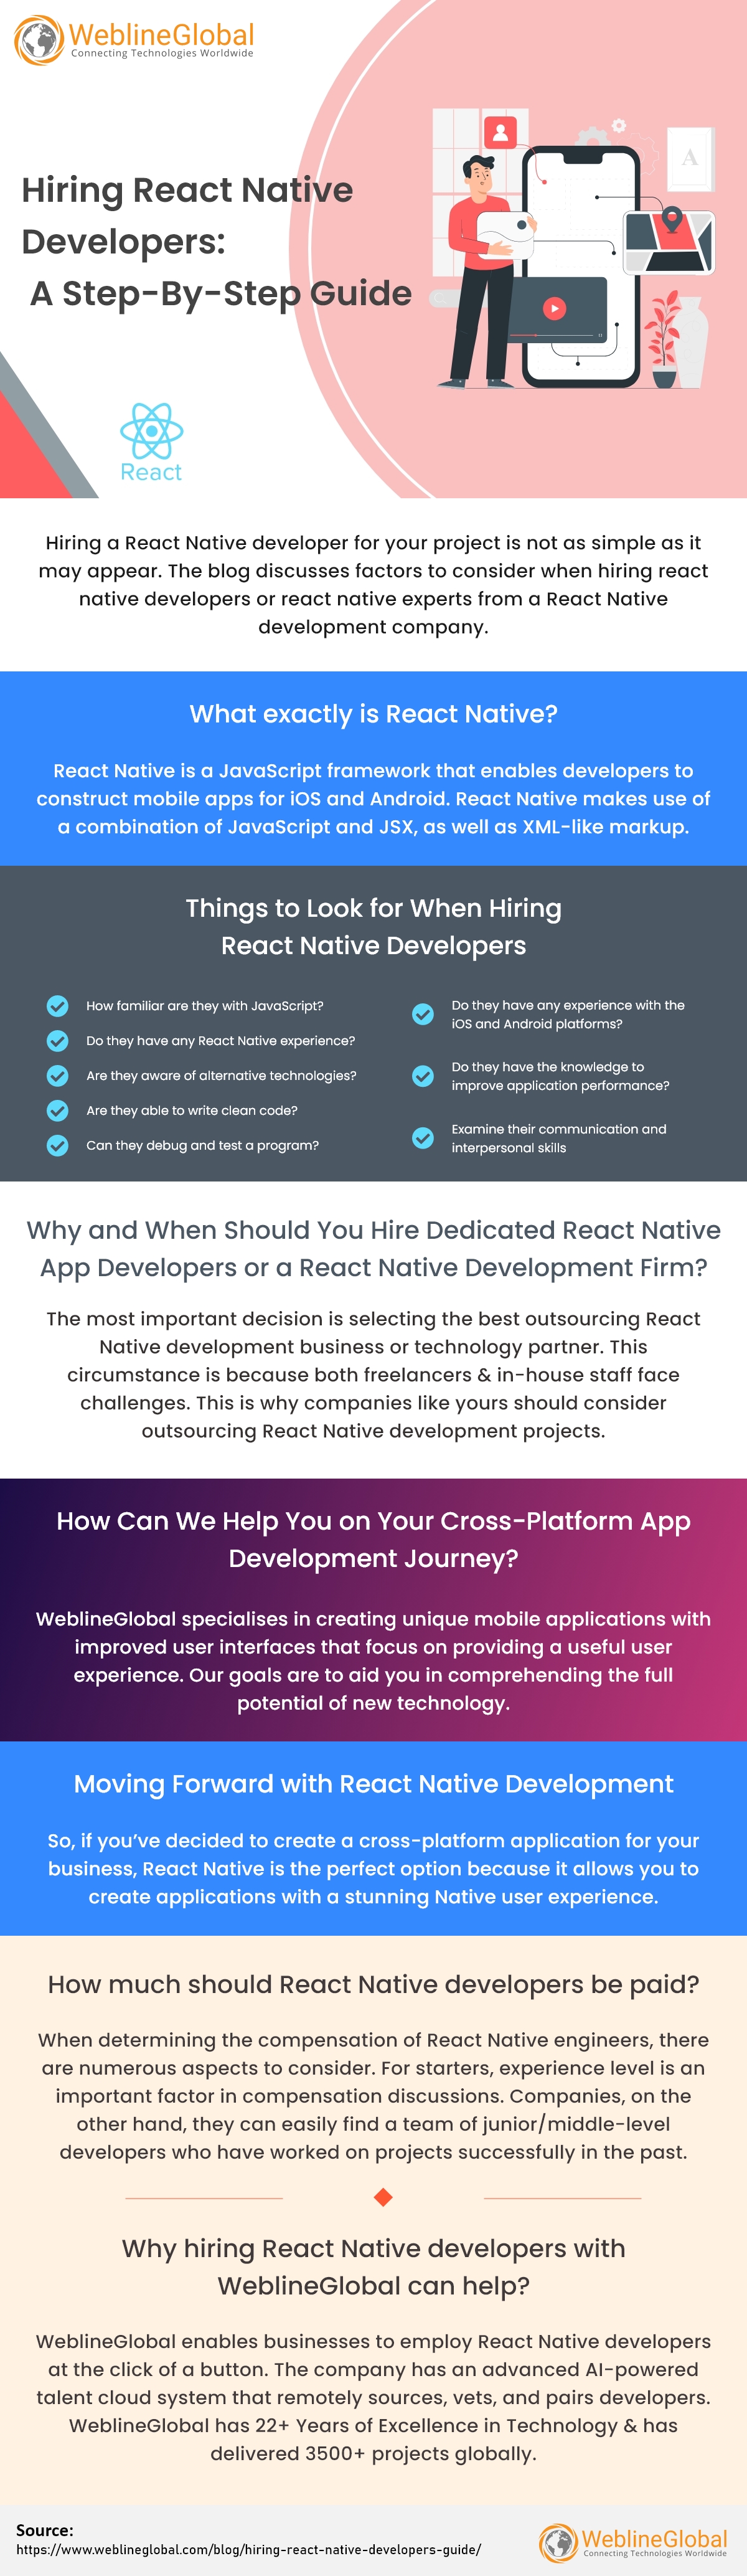 Hiring React Native Developers Guide INFOGRAPHIC